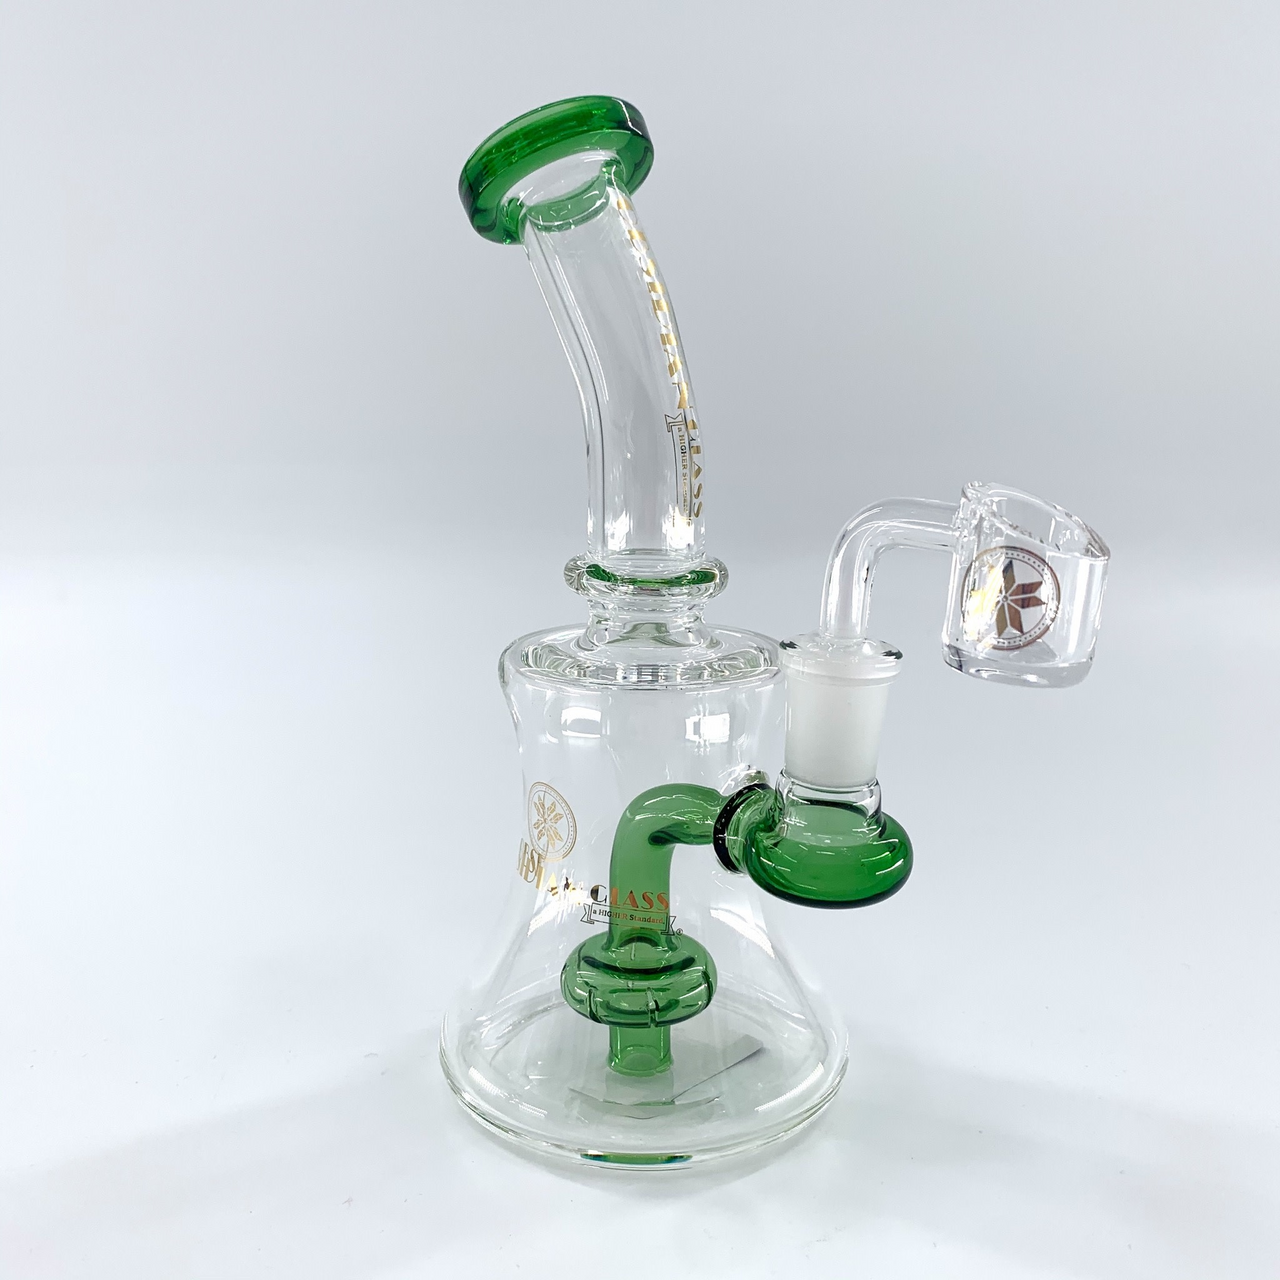 Obsidian Glass Micro Showerhead Rig with Banger and Bowl (7.5")